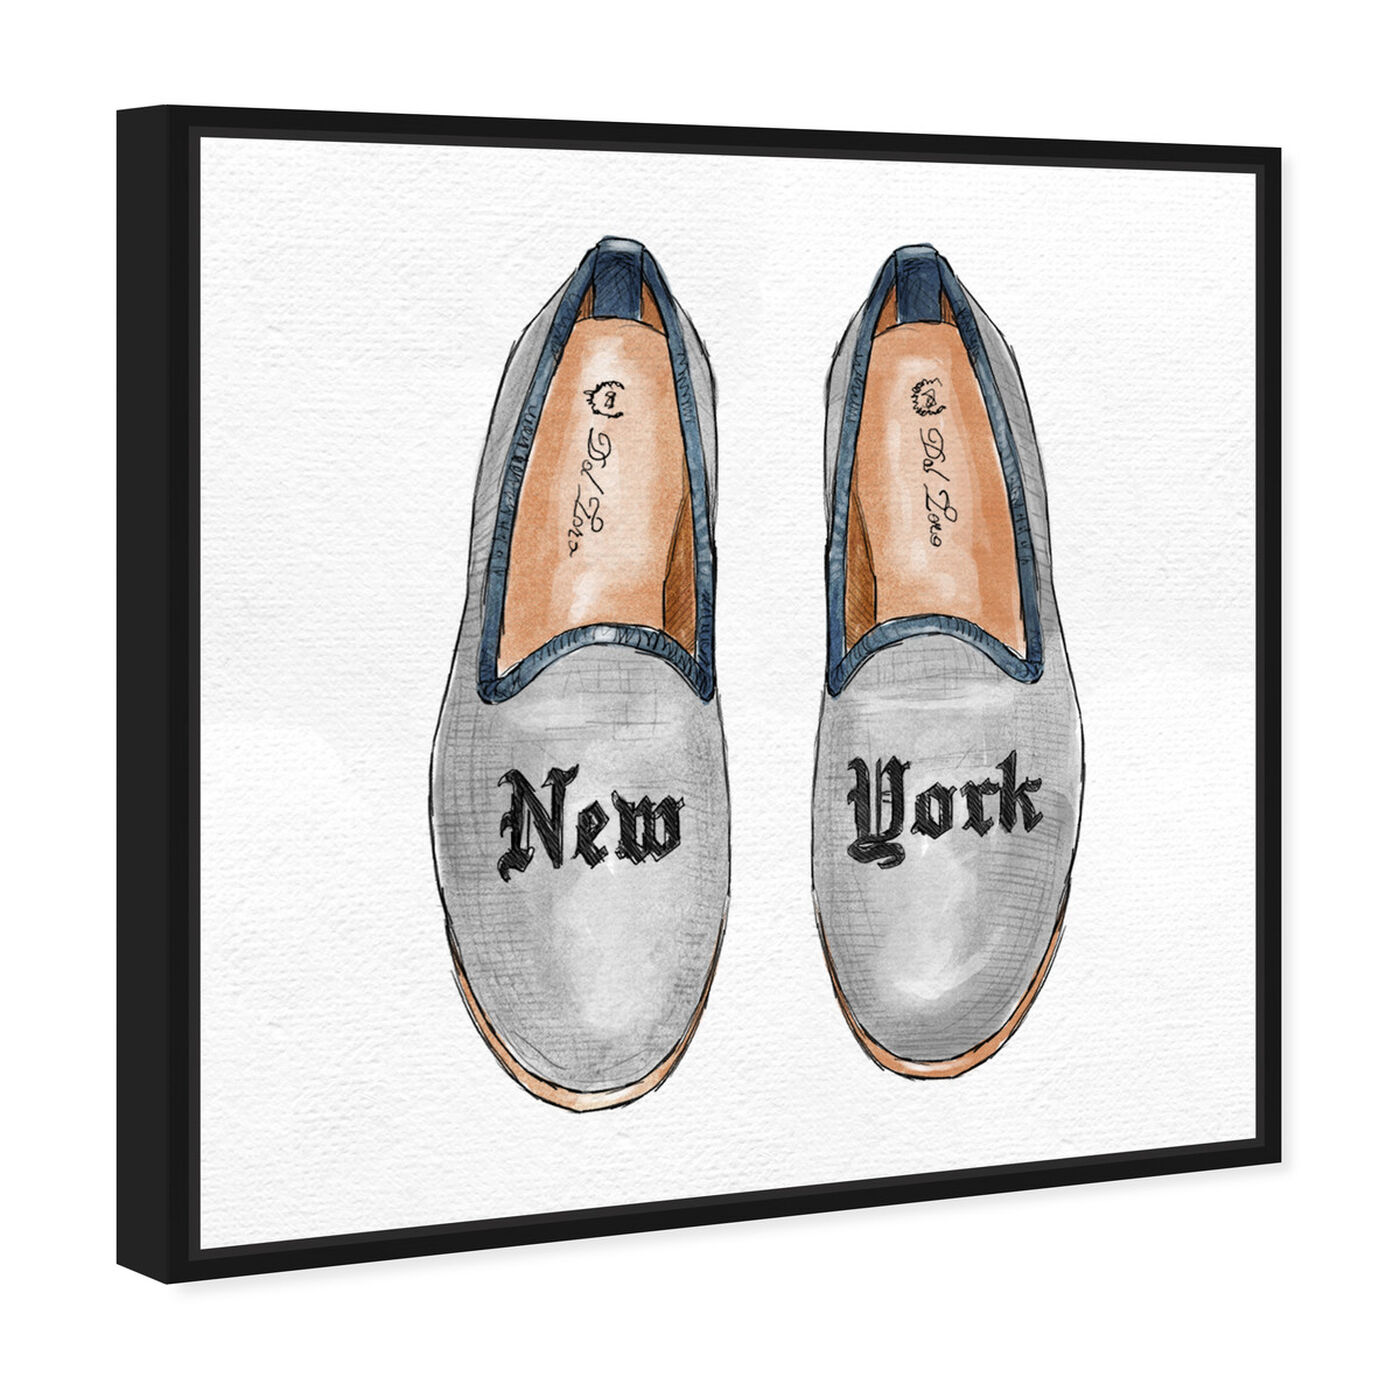 Angled view of New York Slippers featuring fashion and glam and shoes art.